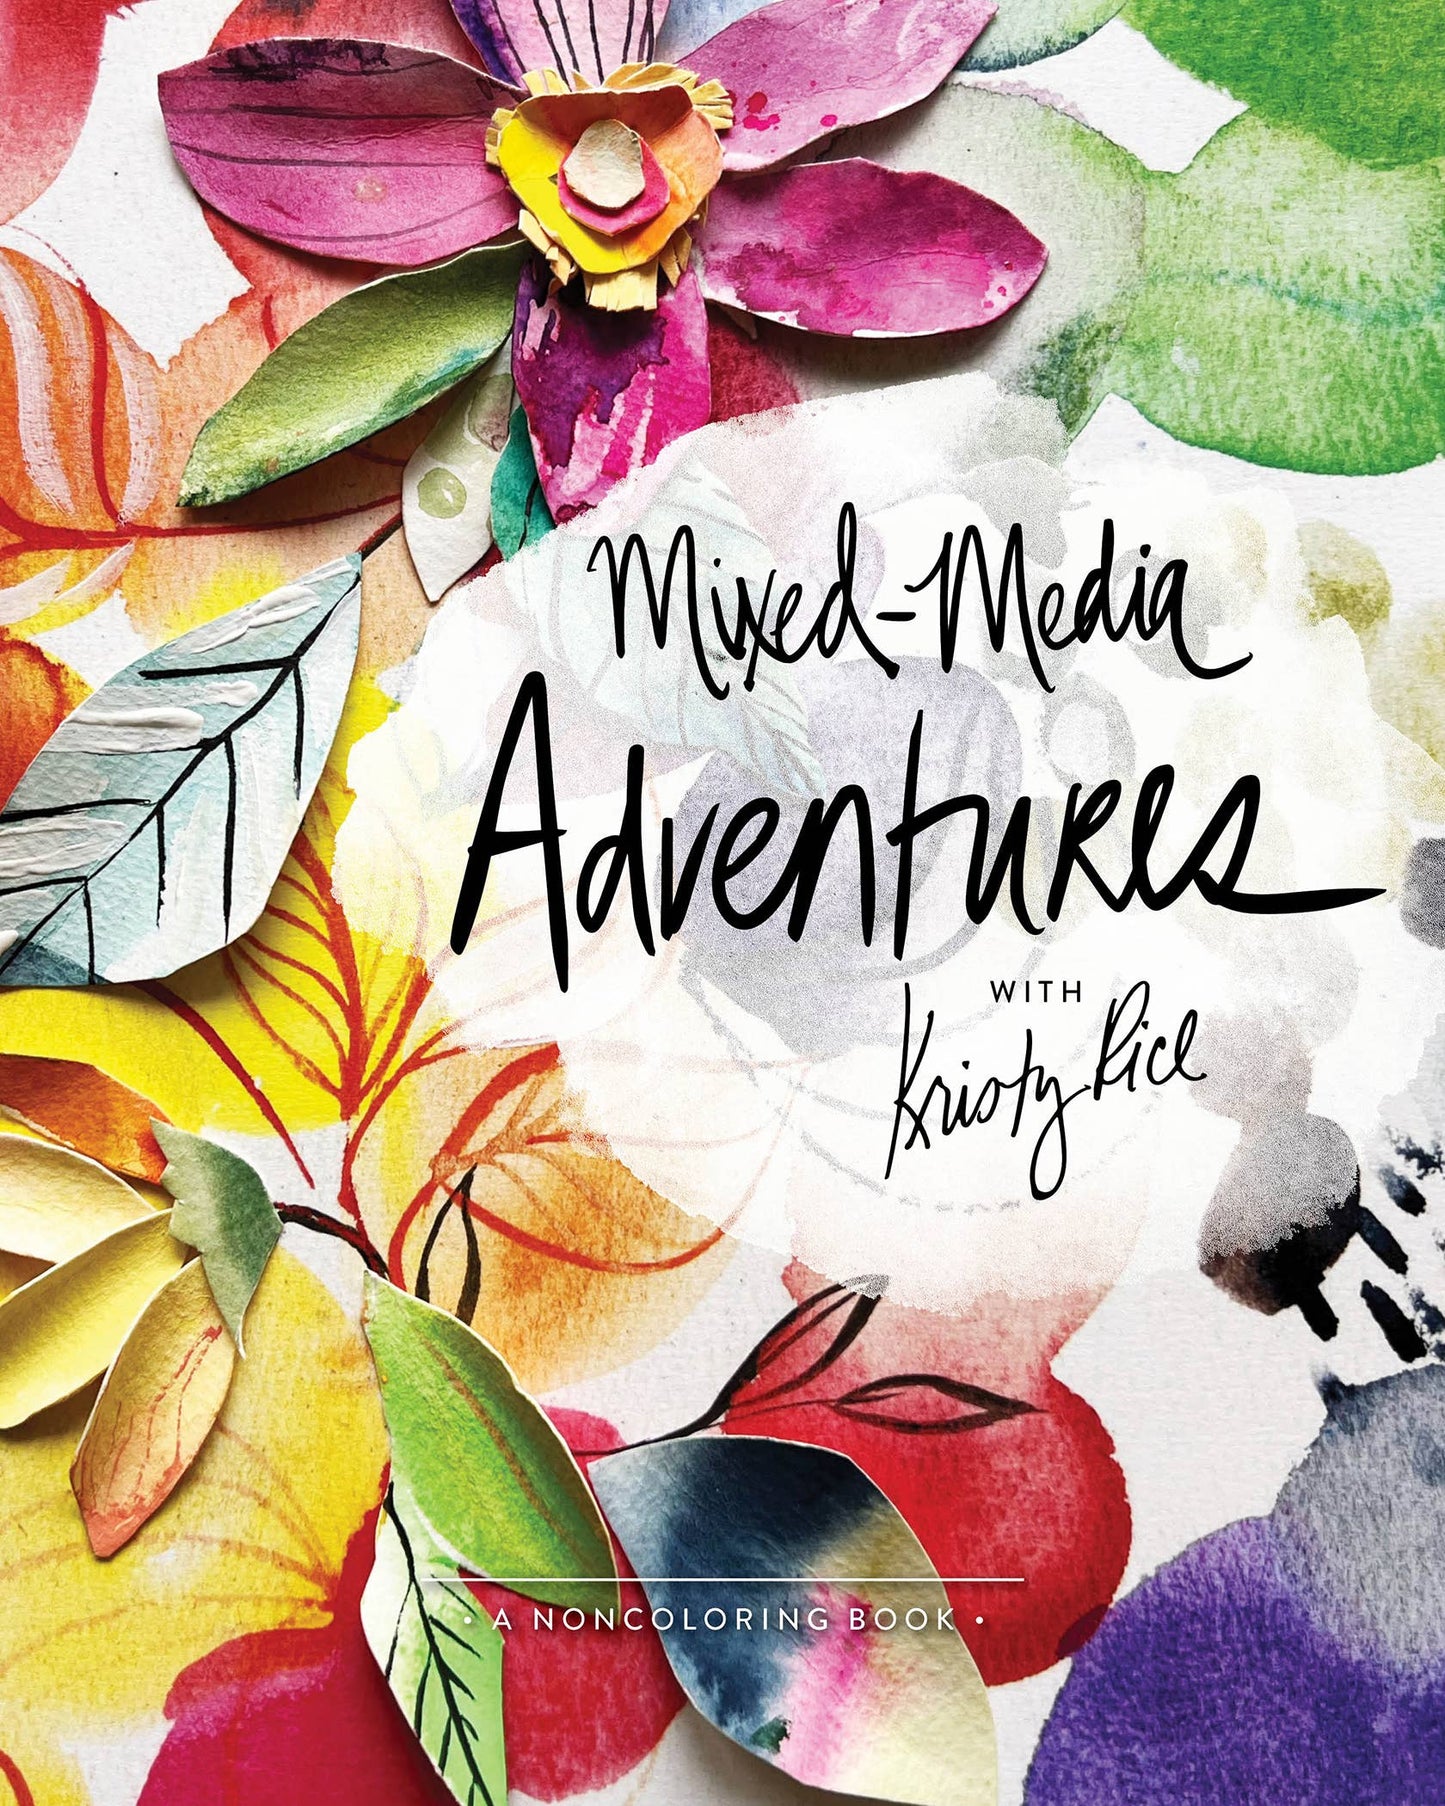 Mixed-Media Adventures with Kristy Rice: A Noncoloring Book – Brainstorm  Art Supply